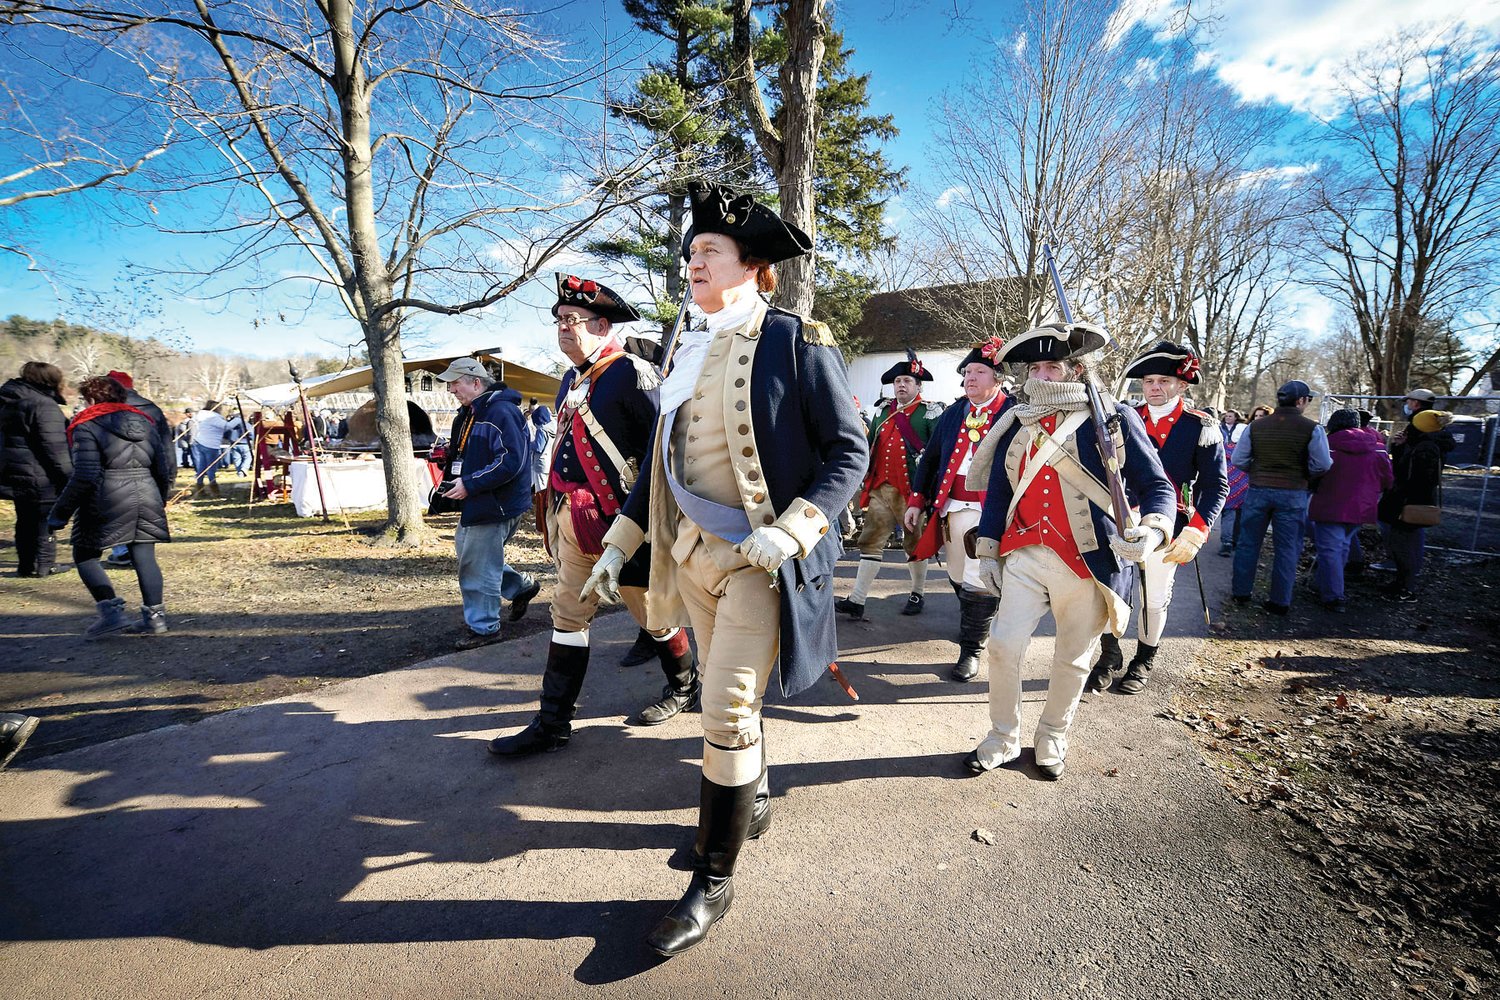 Gen. George Washington, portrayed by John Godziba, and the rest of the officers make their way through the crowd.